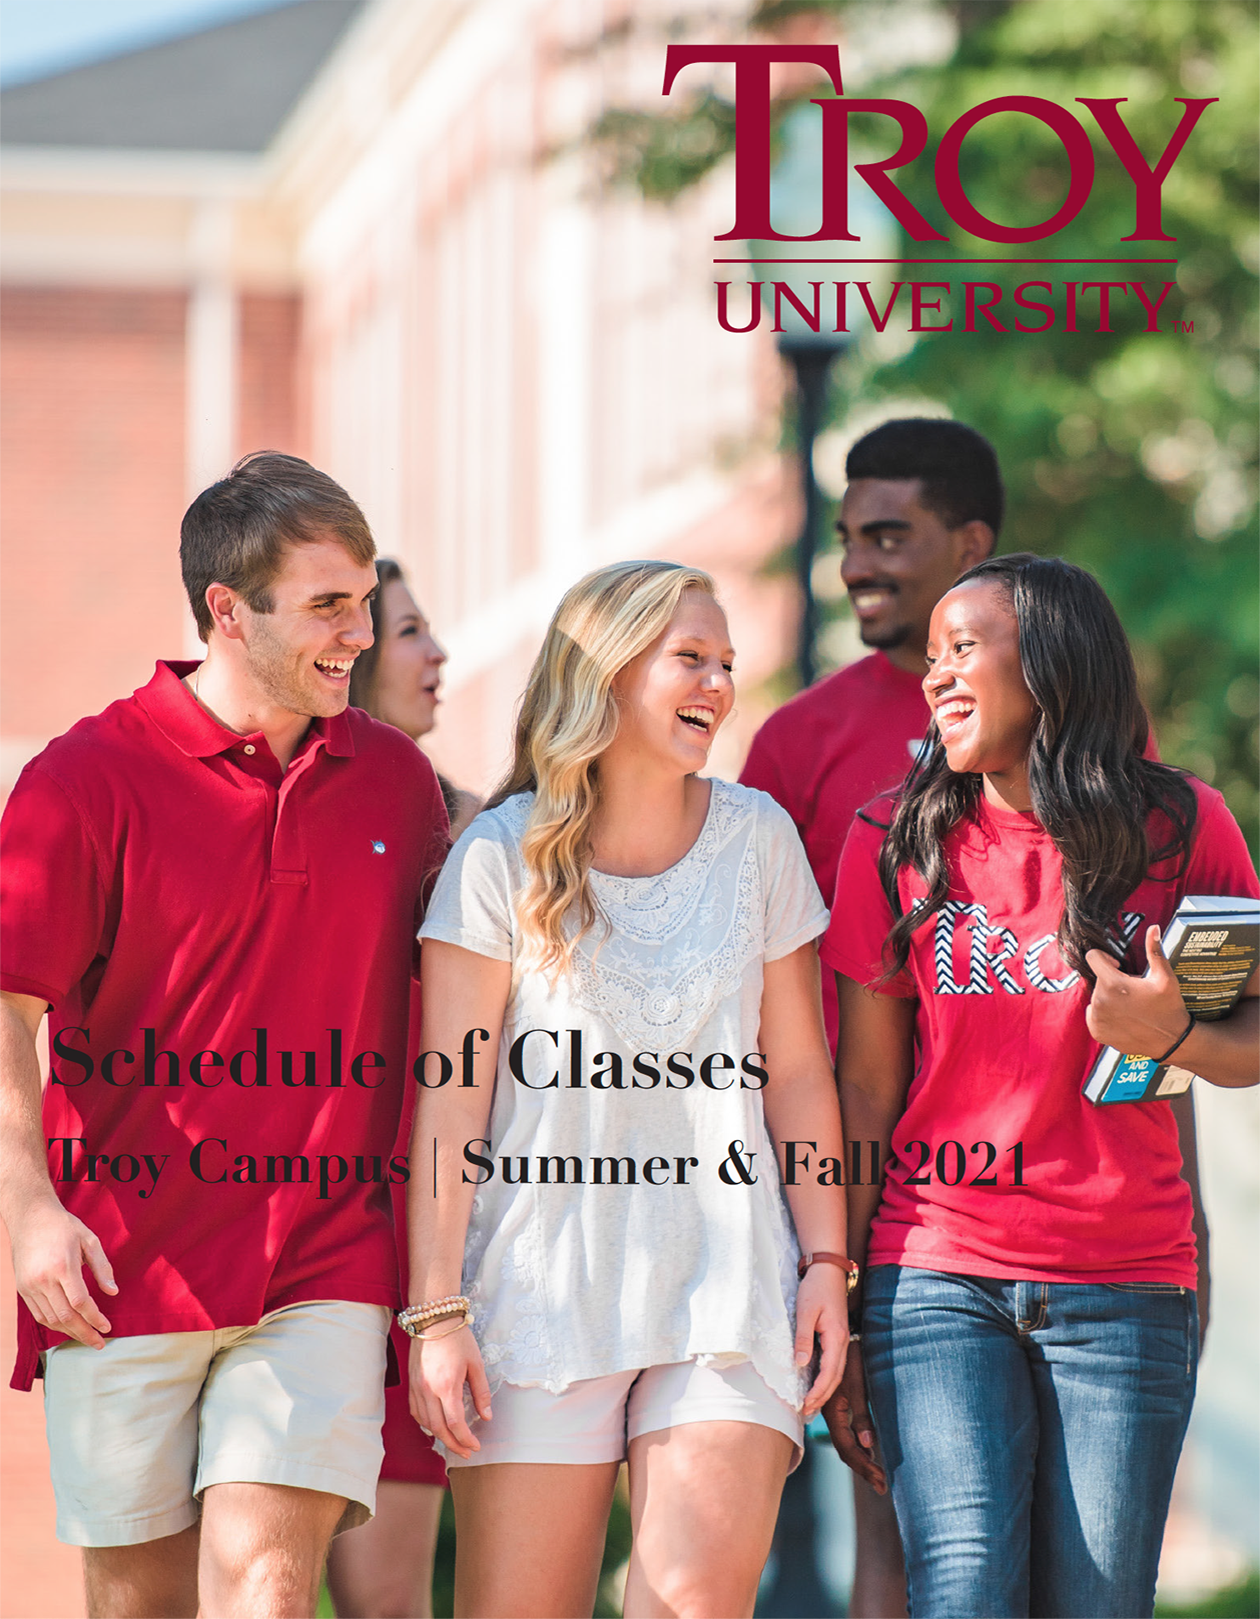 Summer & Fall 2021 PDF</a><br><div class='font-weight-bold'>*NOTE: The schedules are no longer contained in this PDF. Please go to the ‘Searchable Course Listings by Location’ section or go to the <a href='https://sss.troy.edu/Student/Student/Courses' target='_blank' rel=